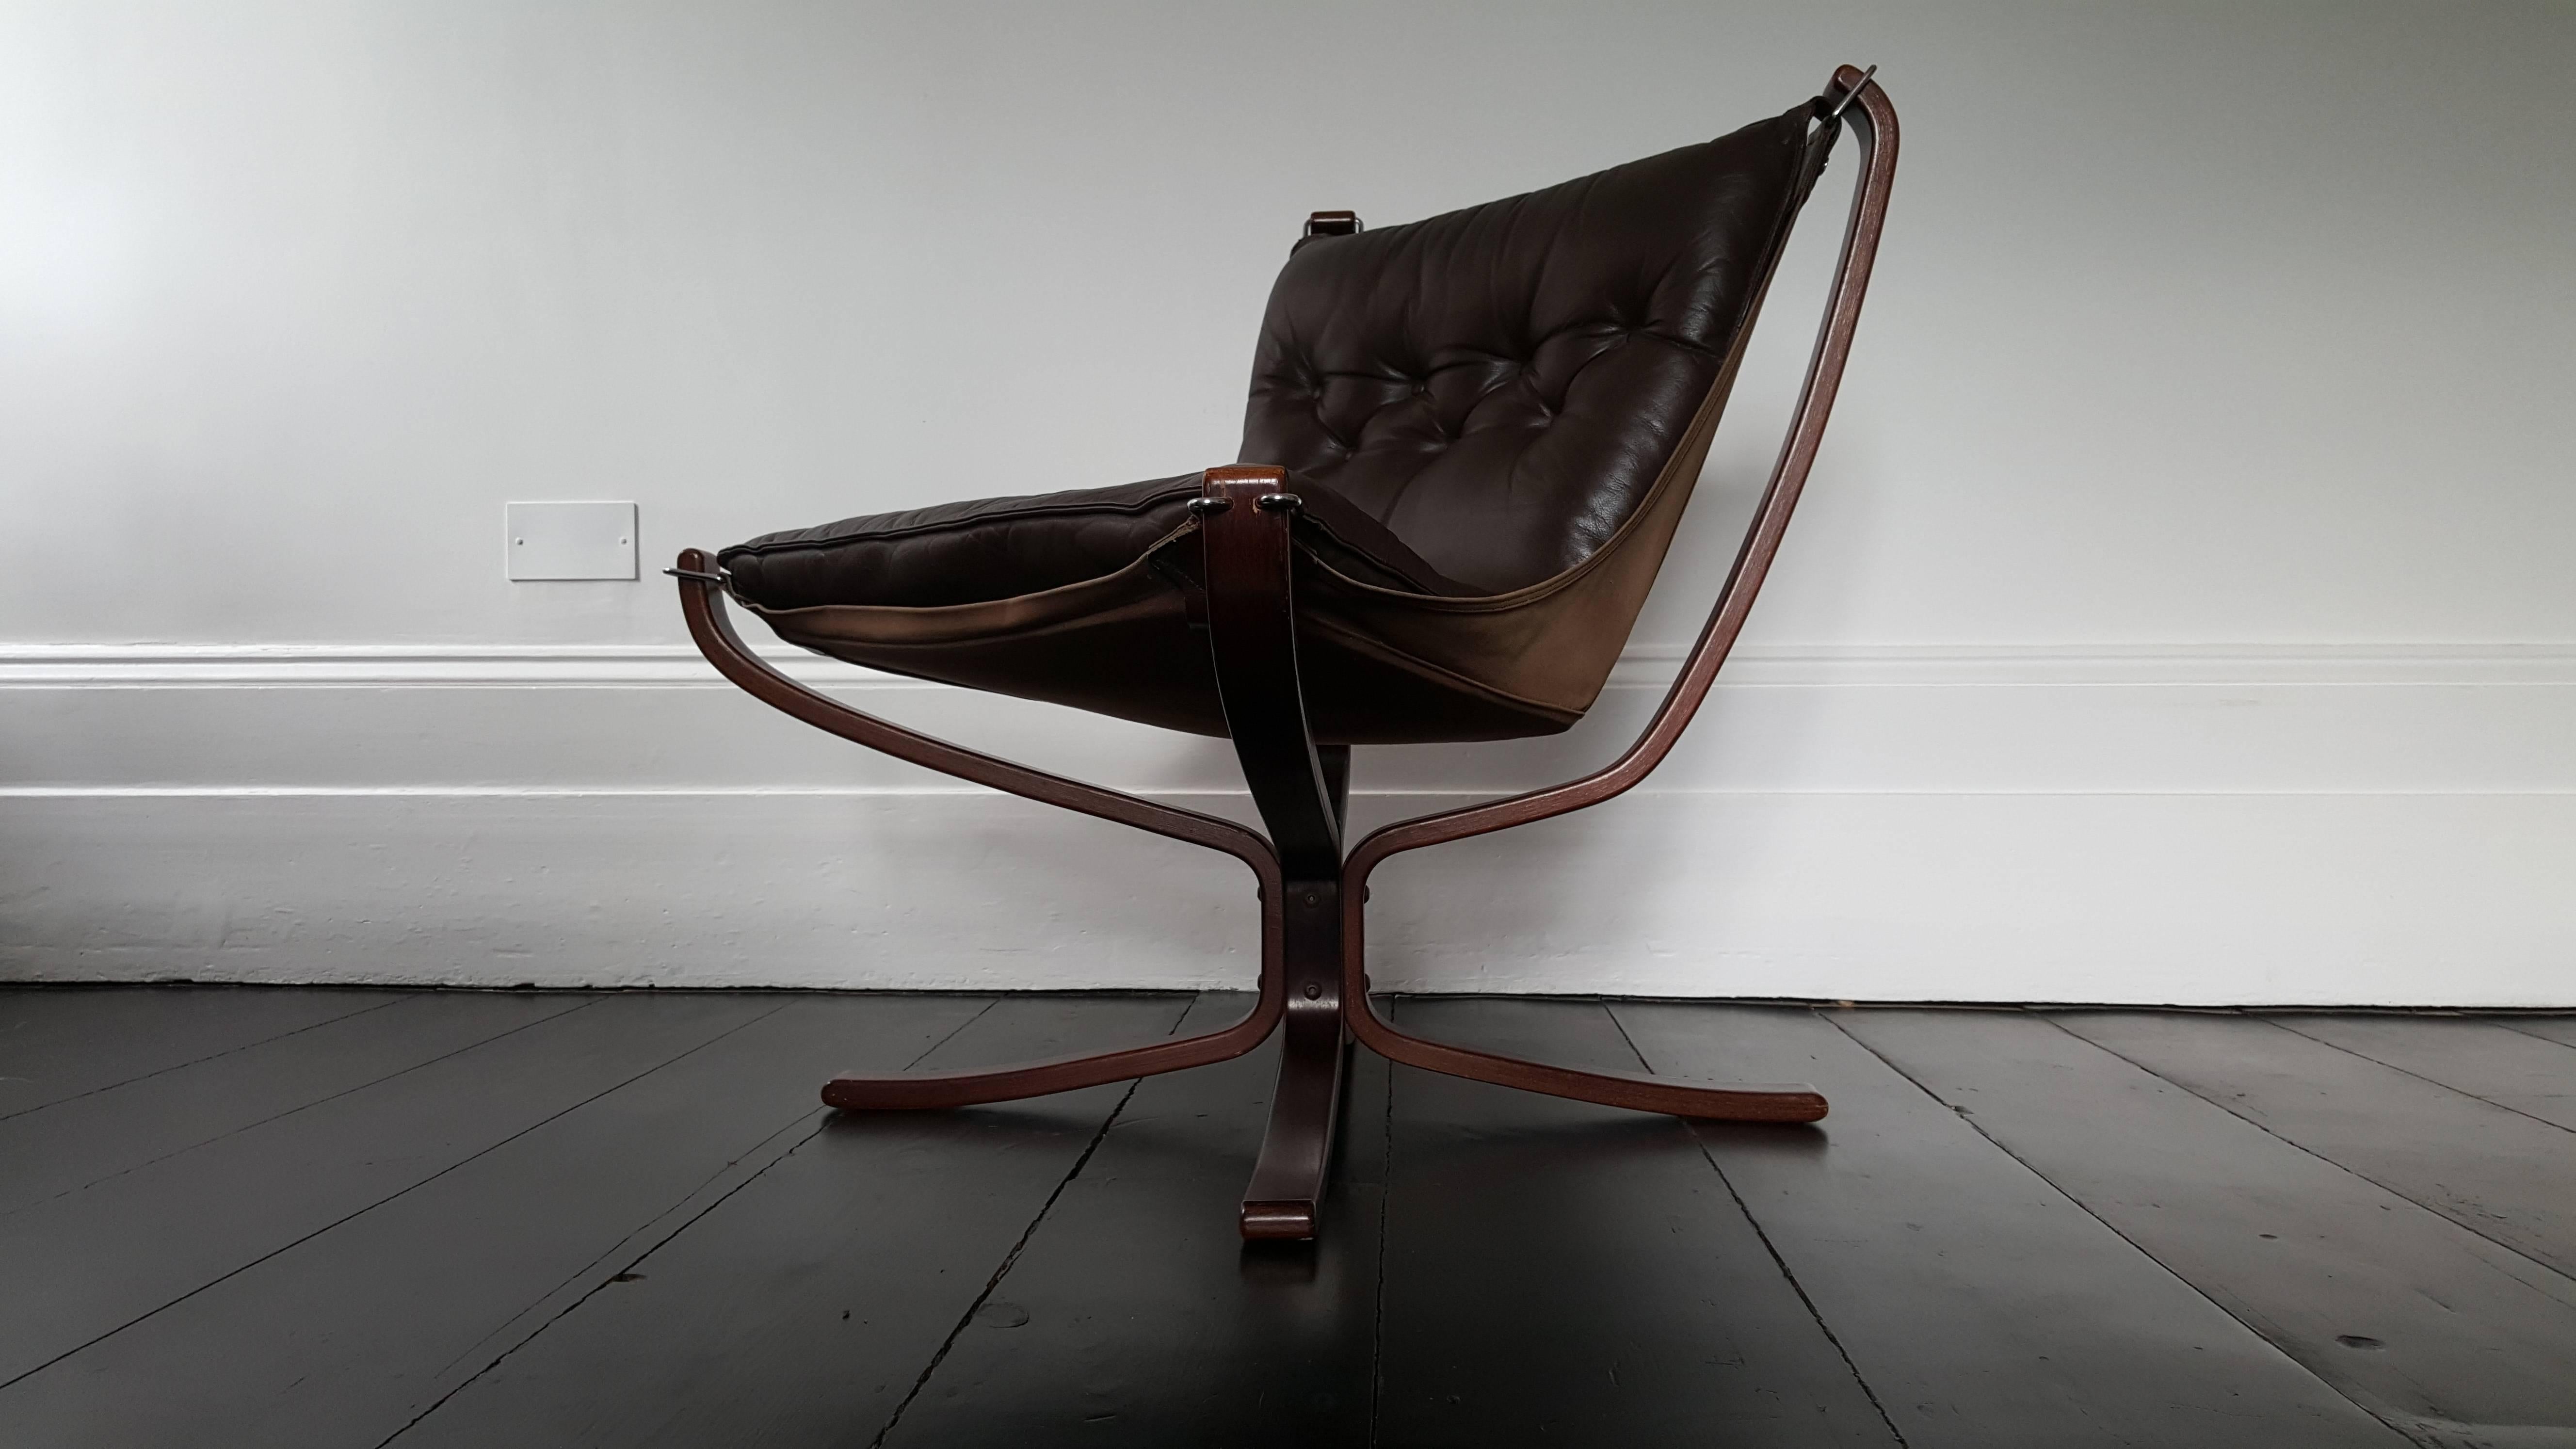 Vintage low-backed X-framed Sigurd Ressell designed Falcon chair, 1970s.

A super comfortable, amazing looking 1970s Sigurd Resell designed iconic Falcon chair. X framed with hammock design. Produced by Vatne Mobler, Norway.
     